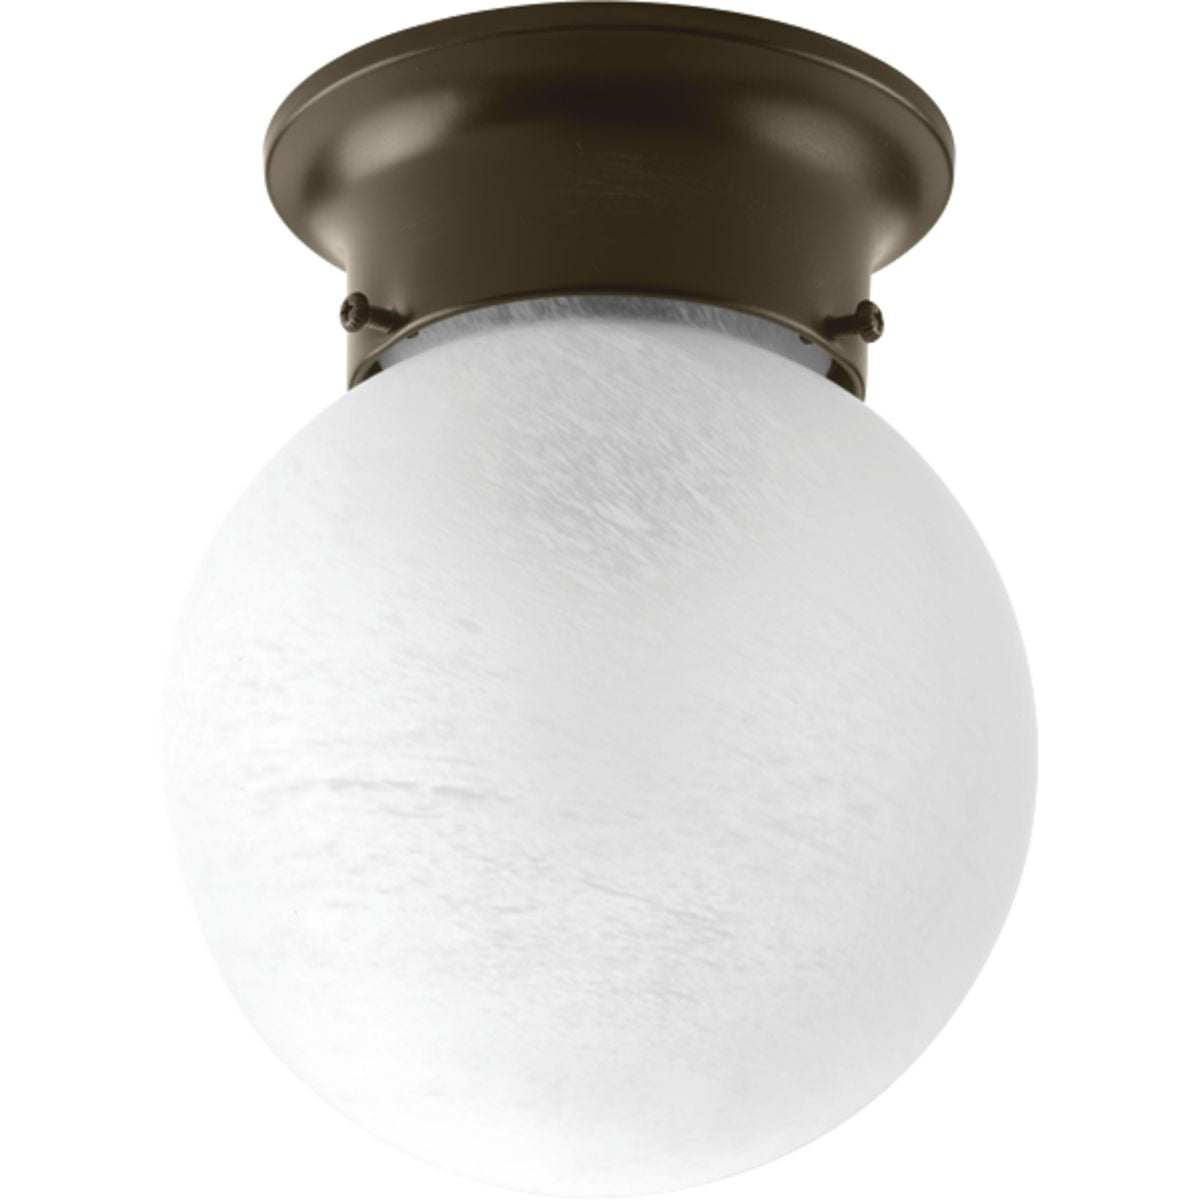 PROGRESS LIGHTING P3401-20 Antique Bronze Glass Globes Collection 6" One-Light Close-to-Ceiling